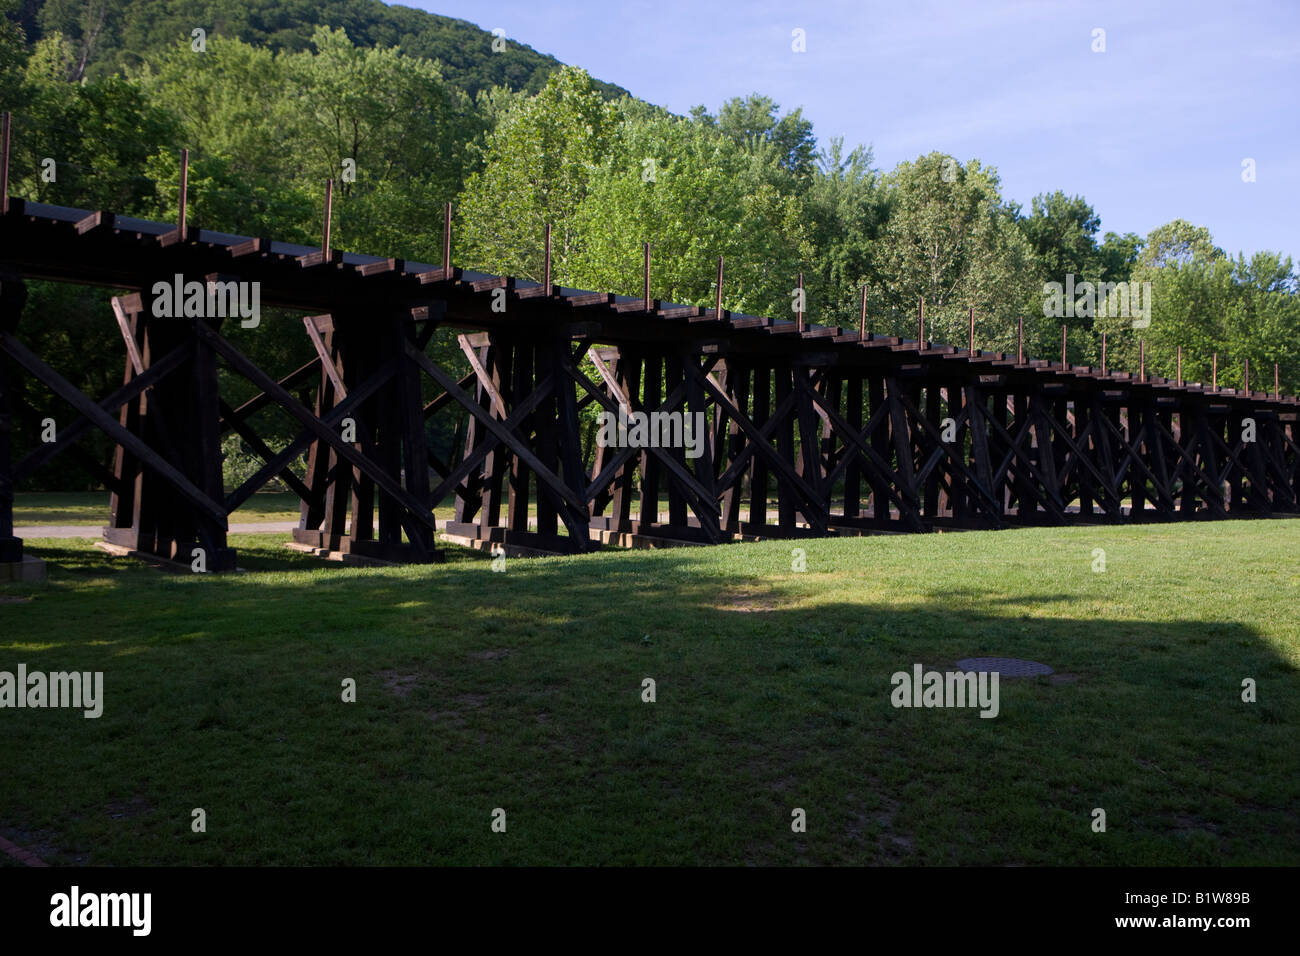 The old Winchester and Potomac Railroad trestle, Harpers Ferry National Historical Park, Harpers Ferry, West Virginia. Stock Photo